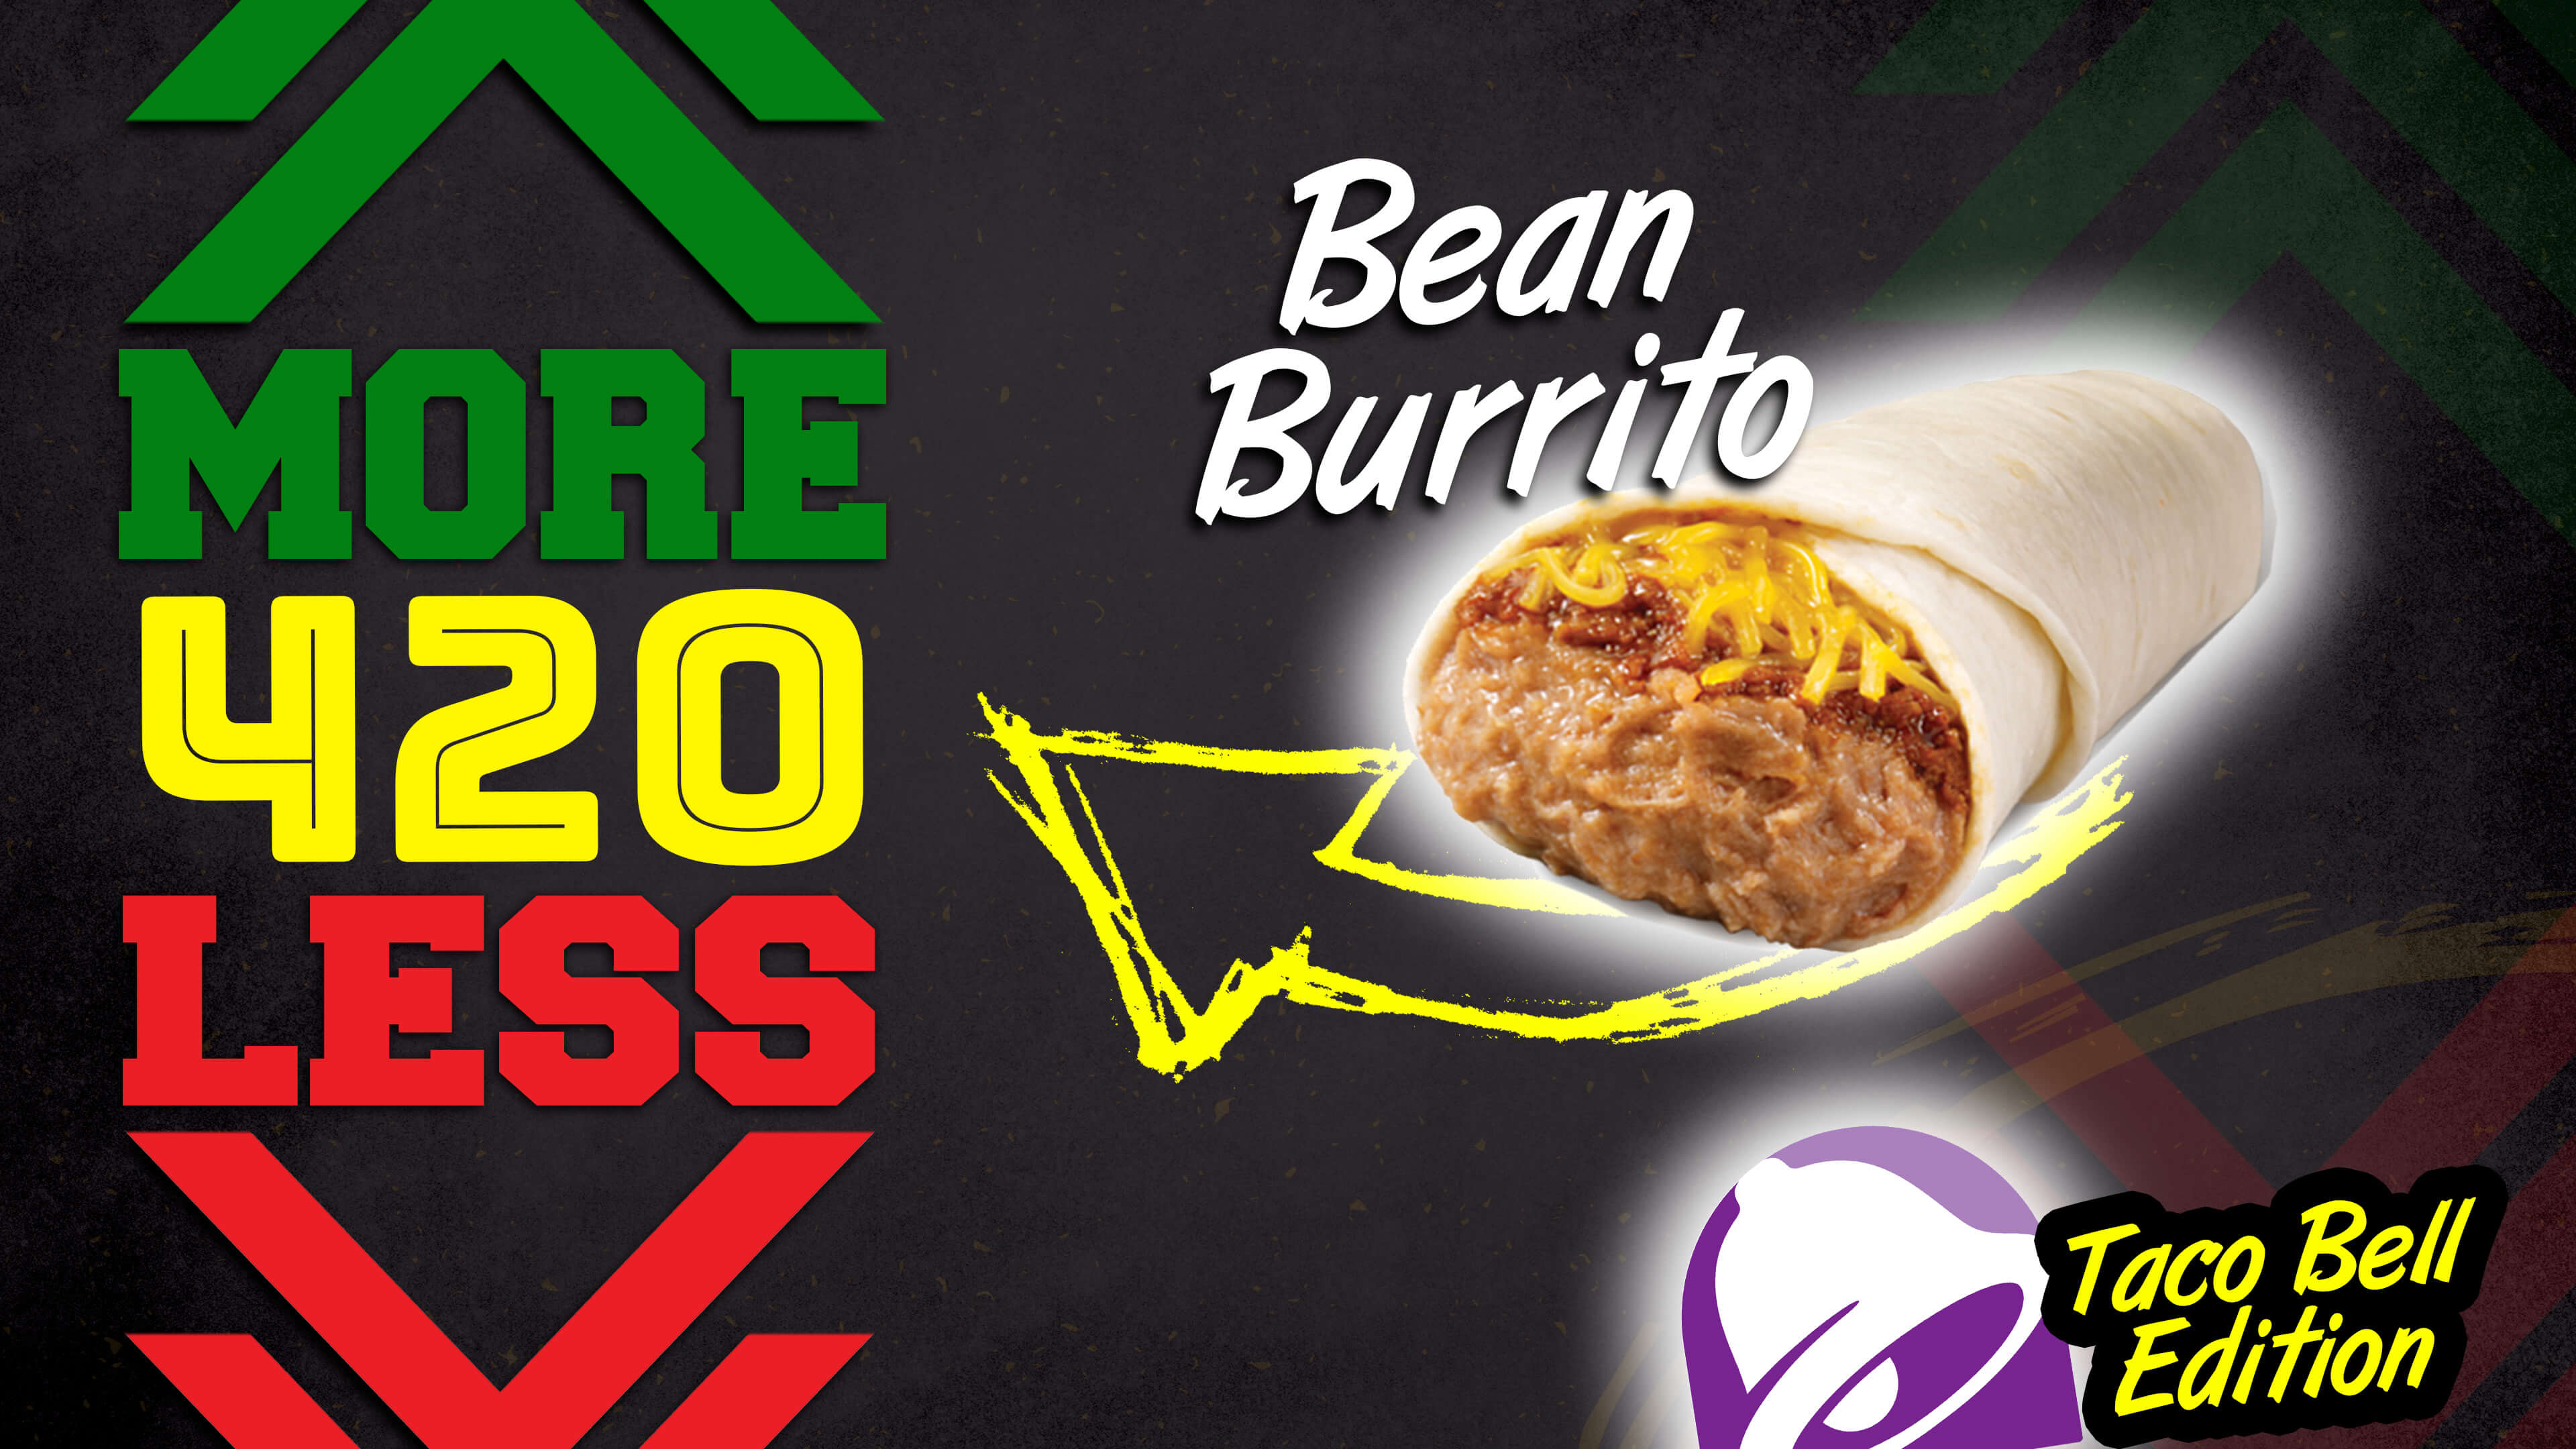 More or Less: Taco Bell Edition